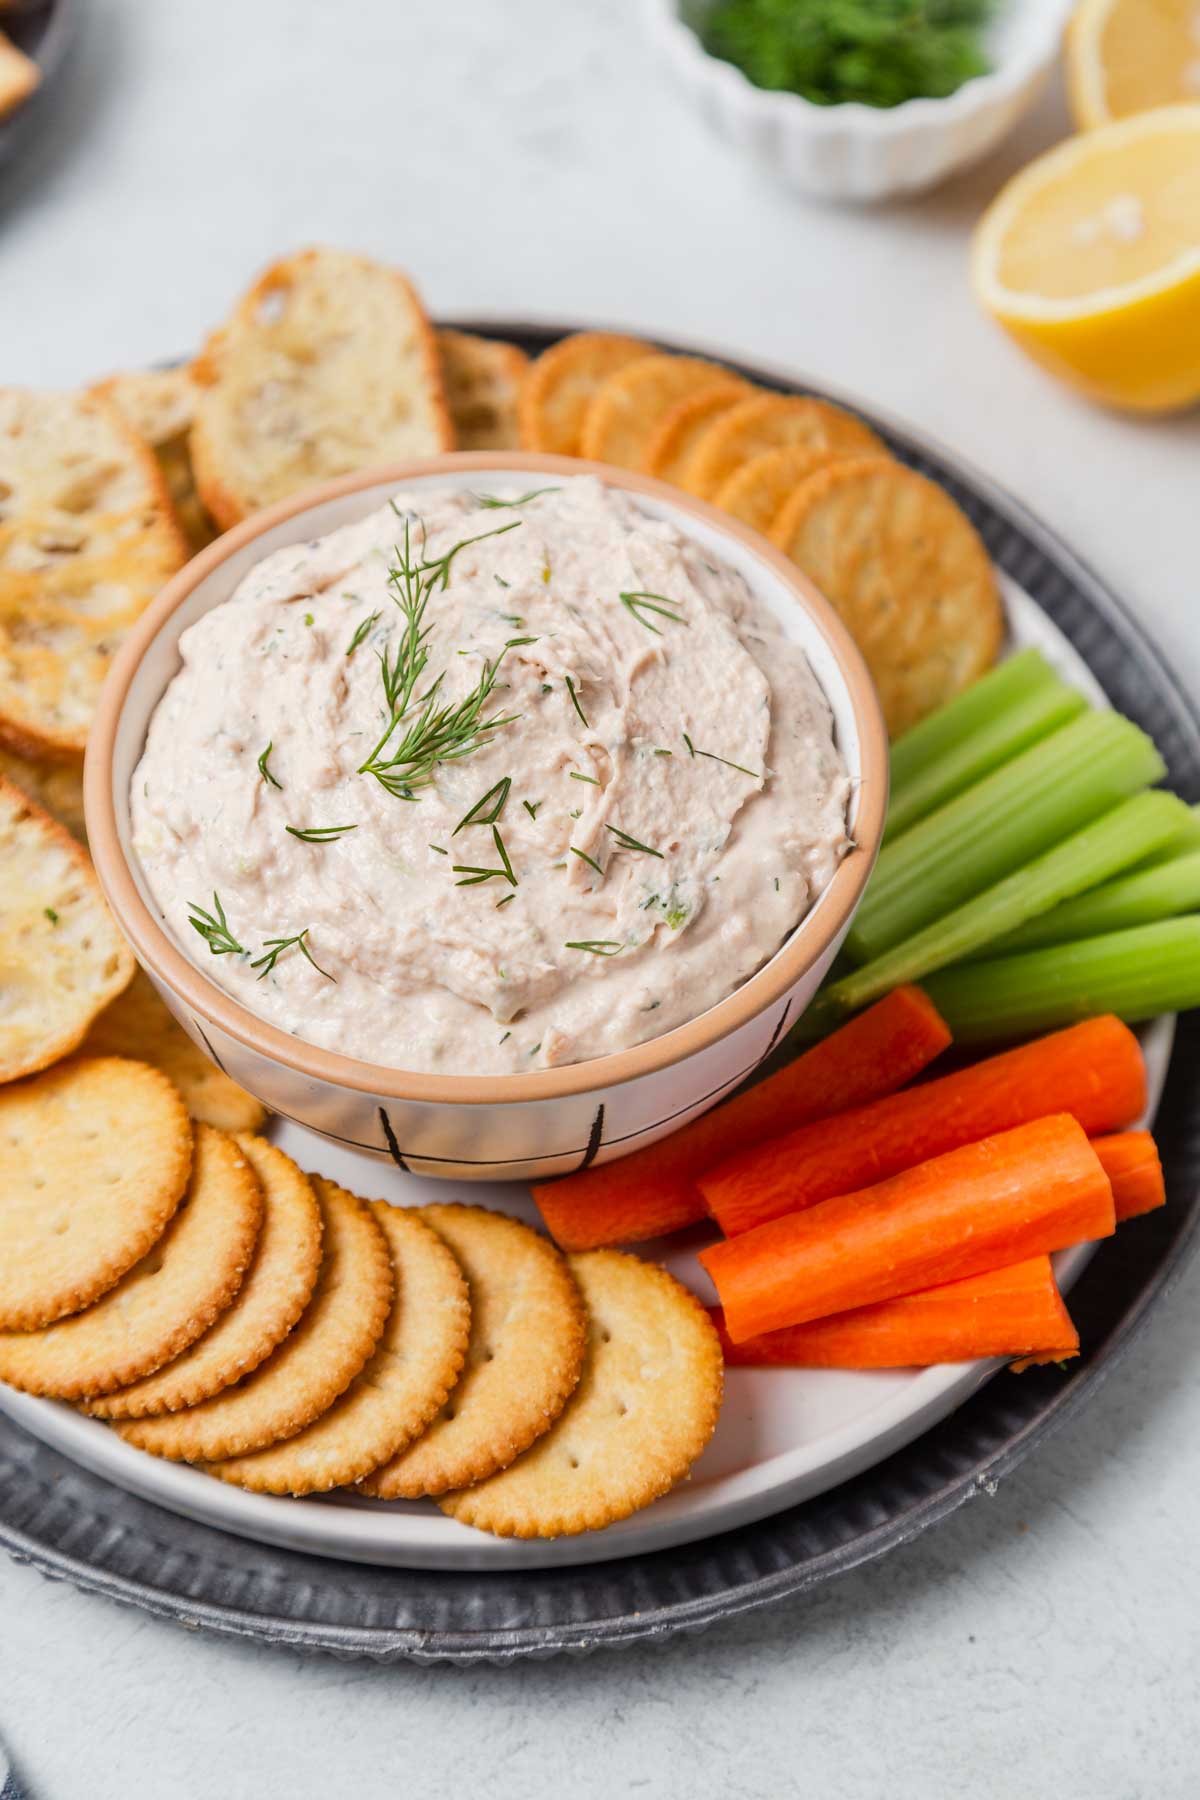 canned salmon dip with vegetables, crackers and crostini on a plate.